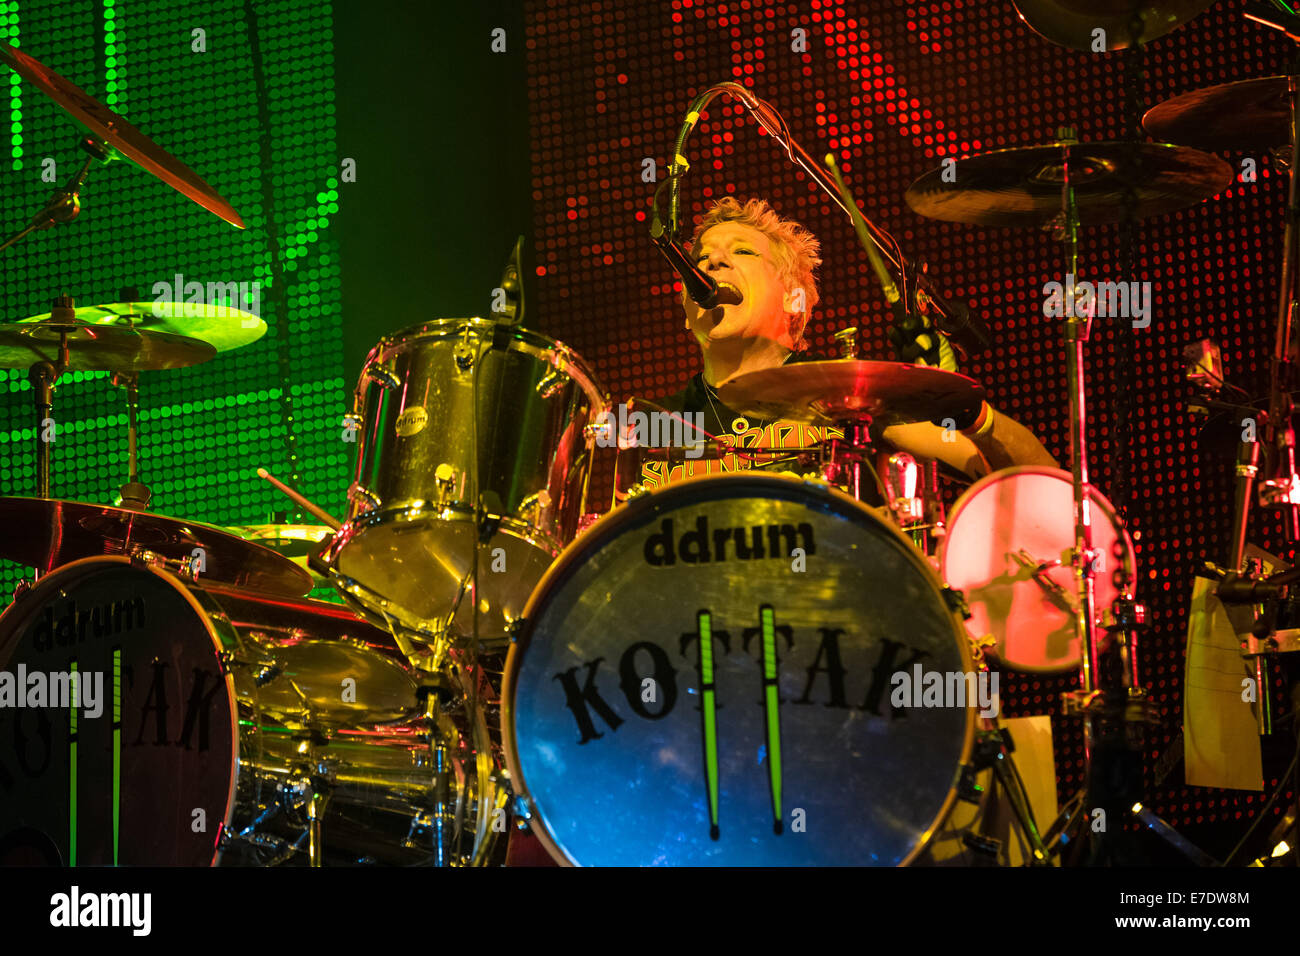 German rock band Scorpions perform live at MEO Arena  Featuring: Scorpions,James Kottak Where: Lisboa, Portugal When: 10 Mar 2014 Stock Photo